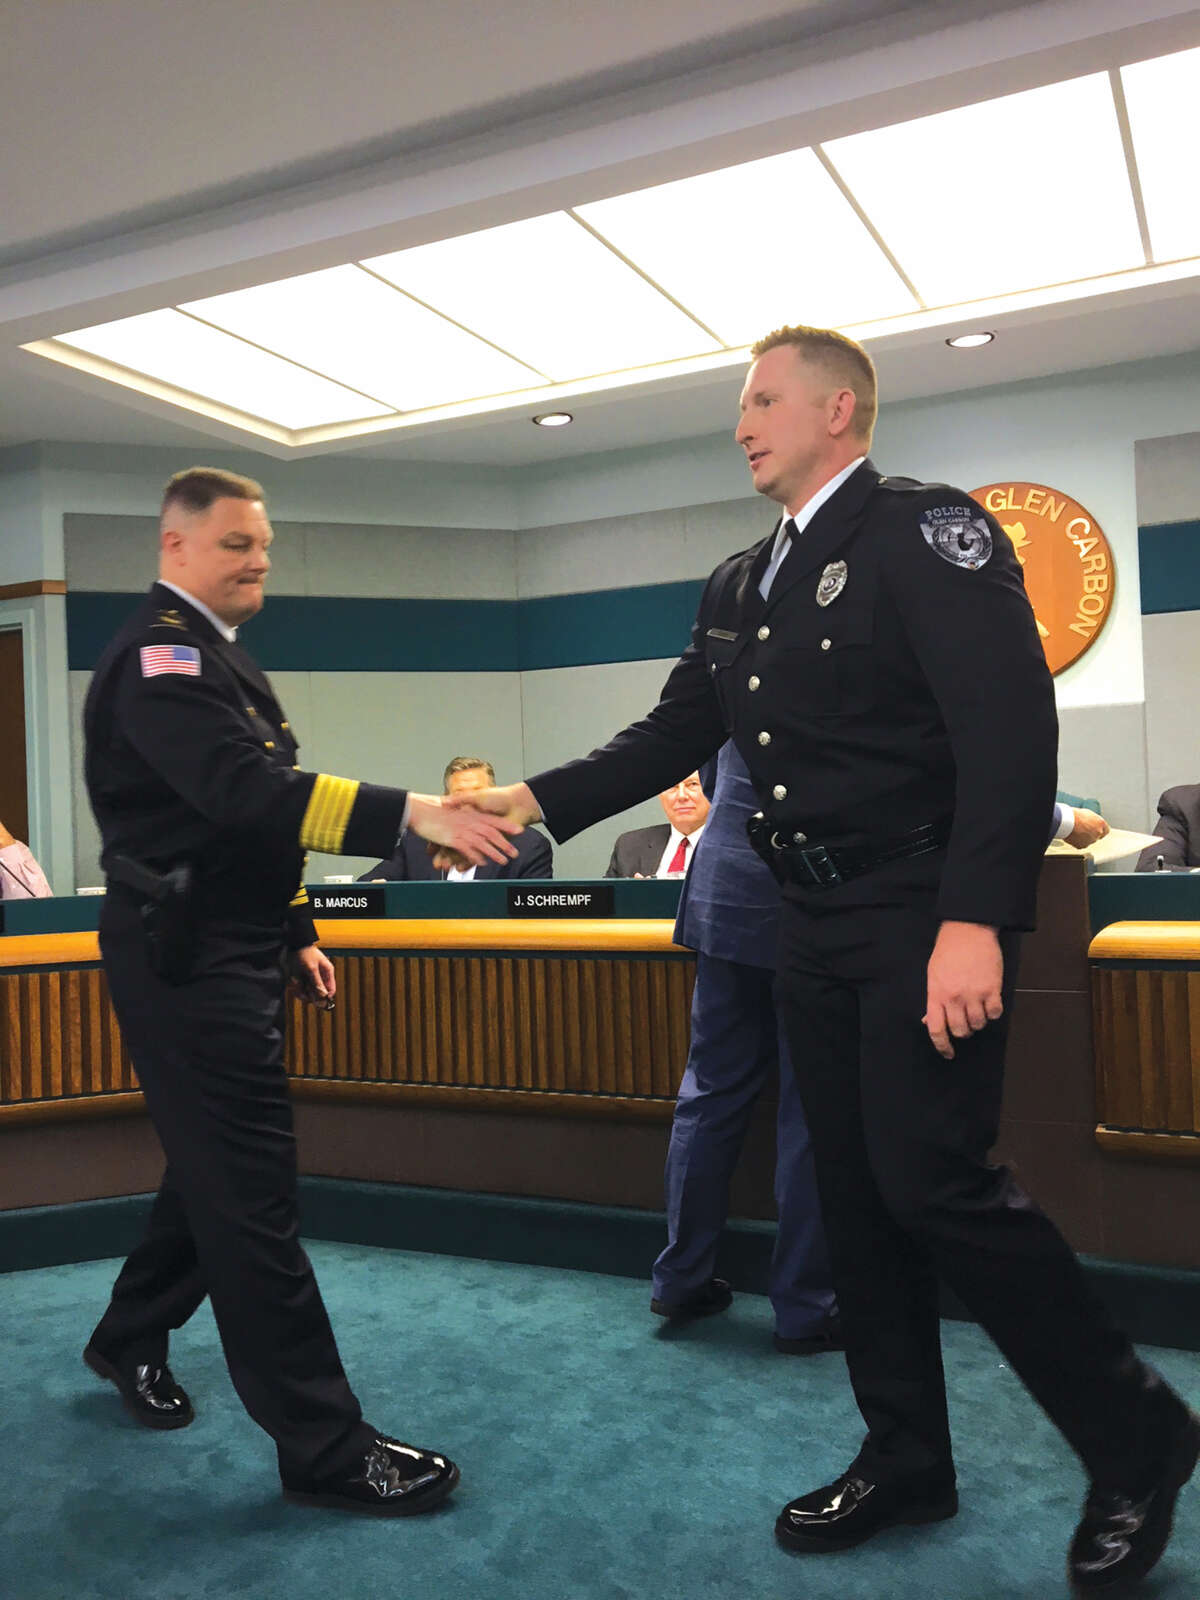 Glen Carbon Police Chief Todd Link, left, congratulates Officer Justin Click who was promoted to the rank of sergeant in the Glen Carbon Police Department. Click has been with the department since 2011